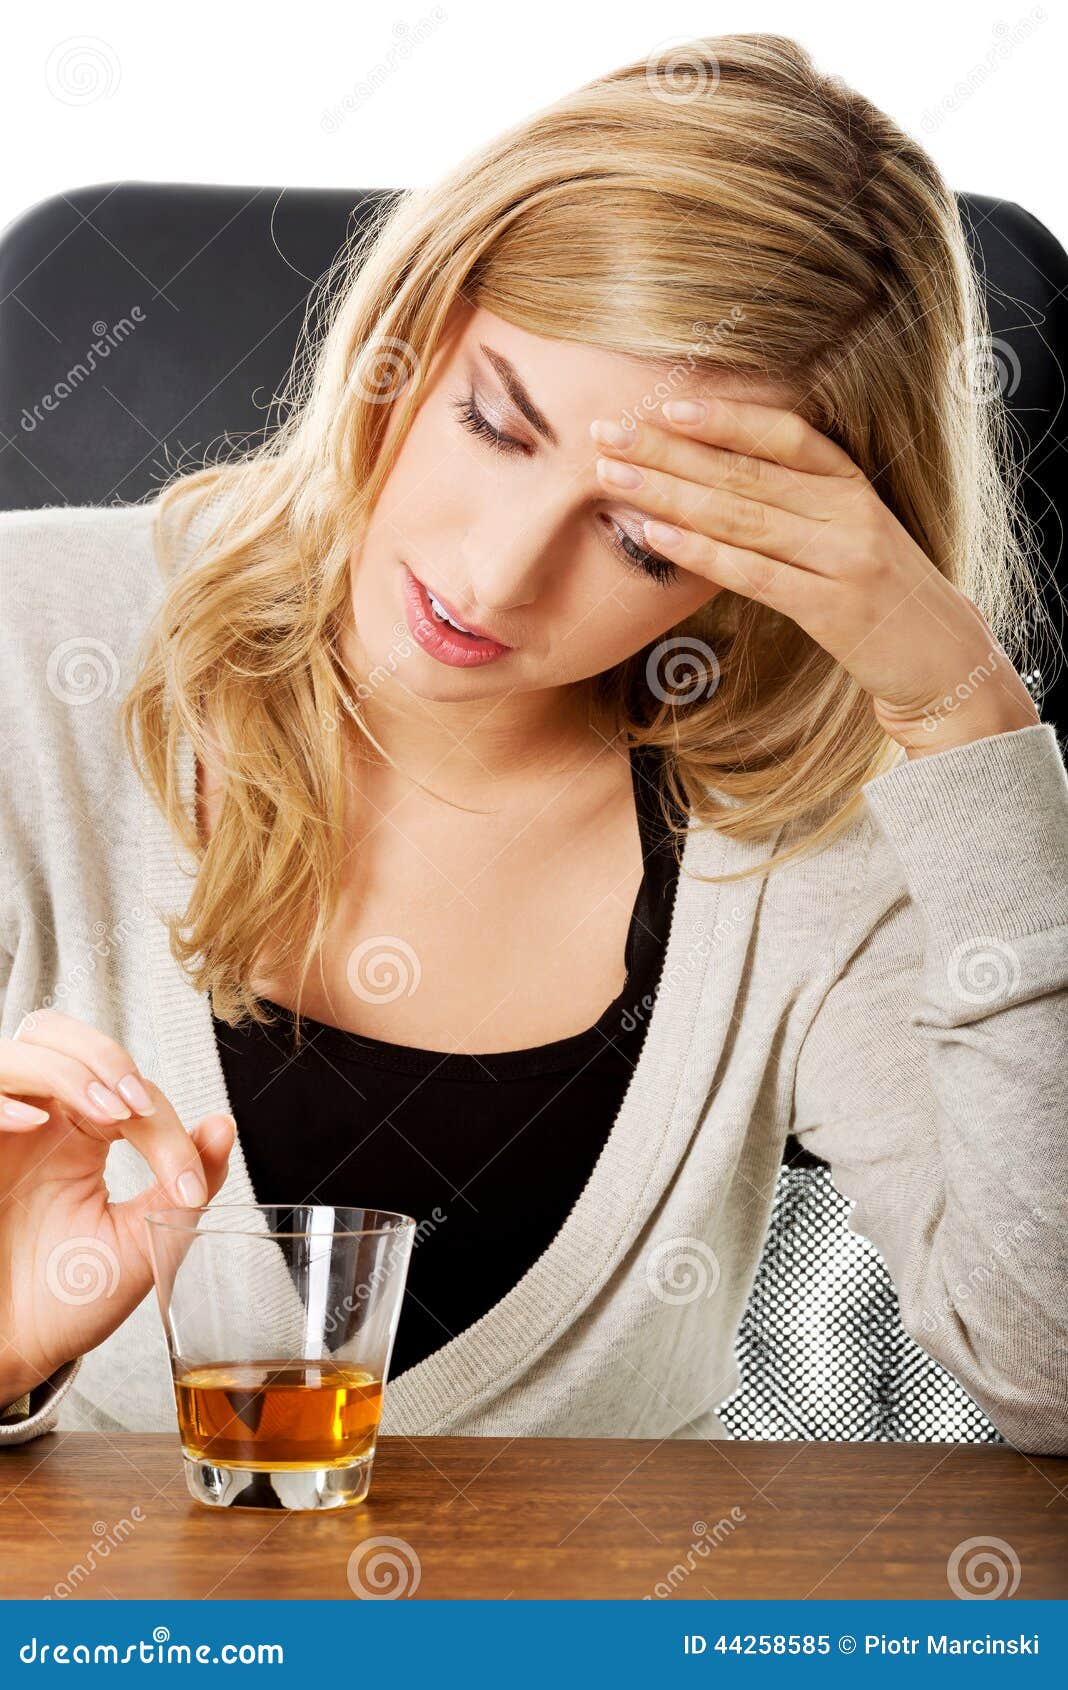 Yound Woman In Depression Drinking Alcohol Stock Image Image Of Pensive Addiction 44258585